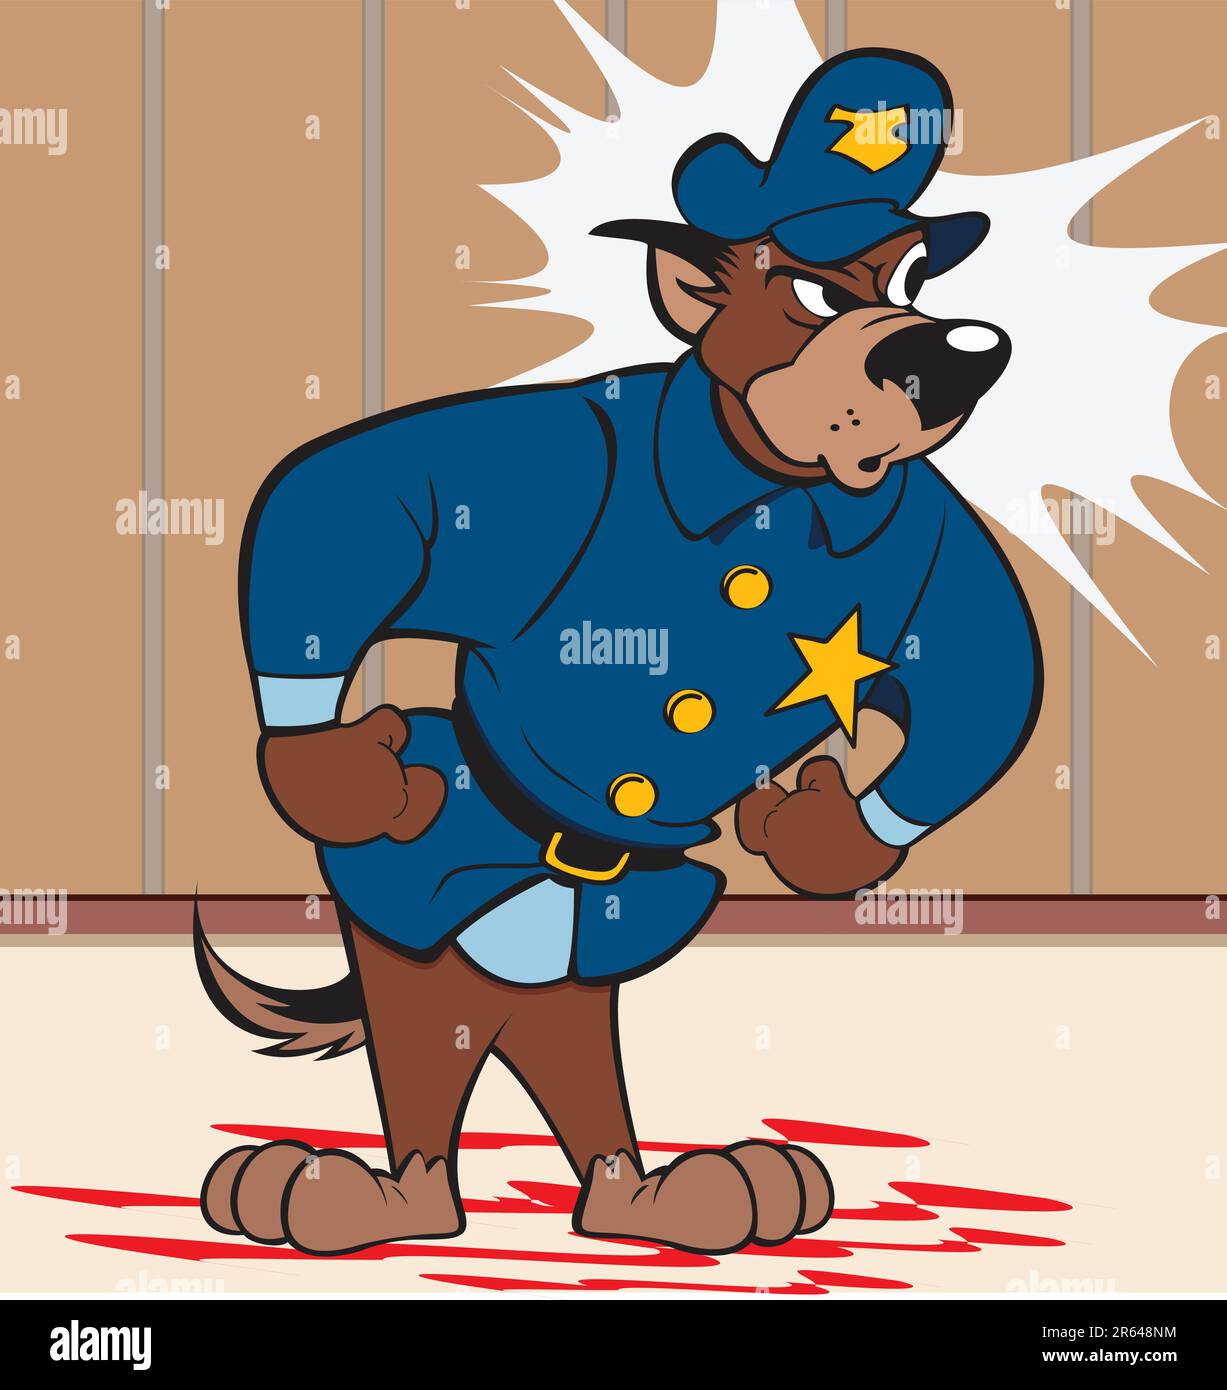 Vector Illustration of a police dog character. Art done in Adobe Illustrator, saved as an AI8 EPS file. Can be scaled to any size without loss of q... Stock Vector